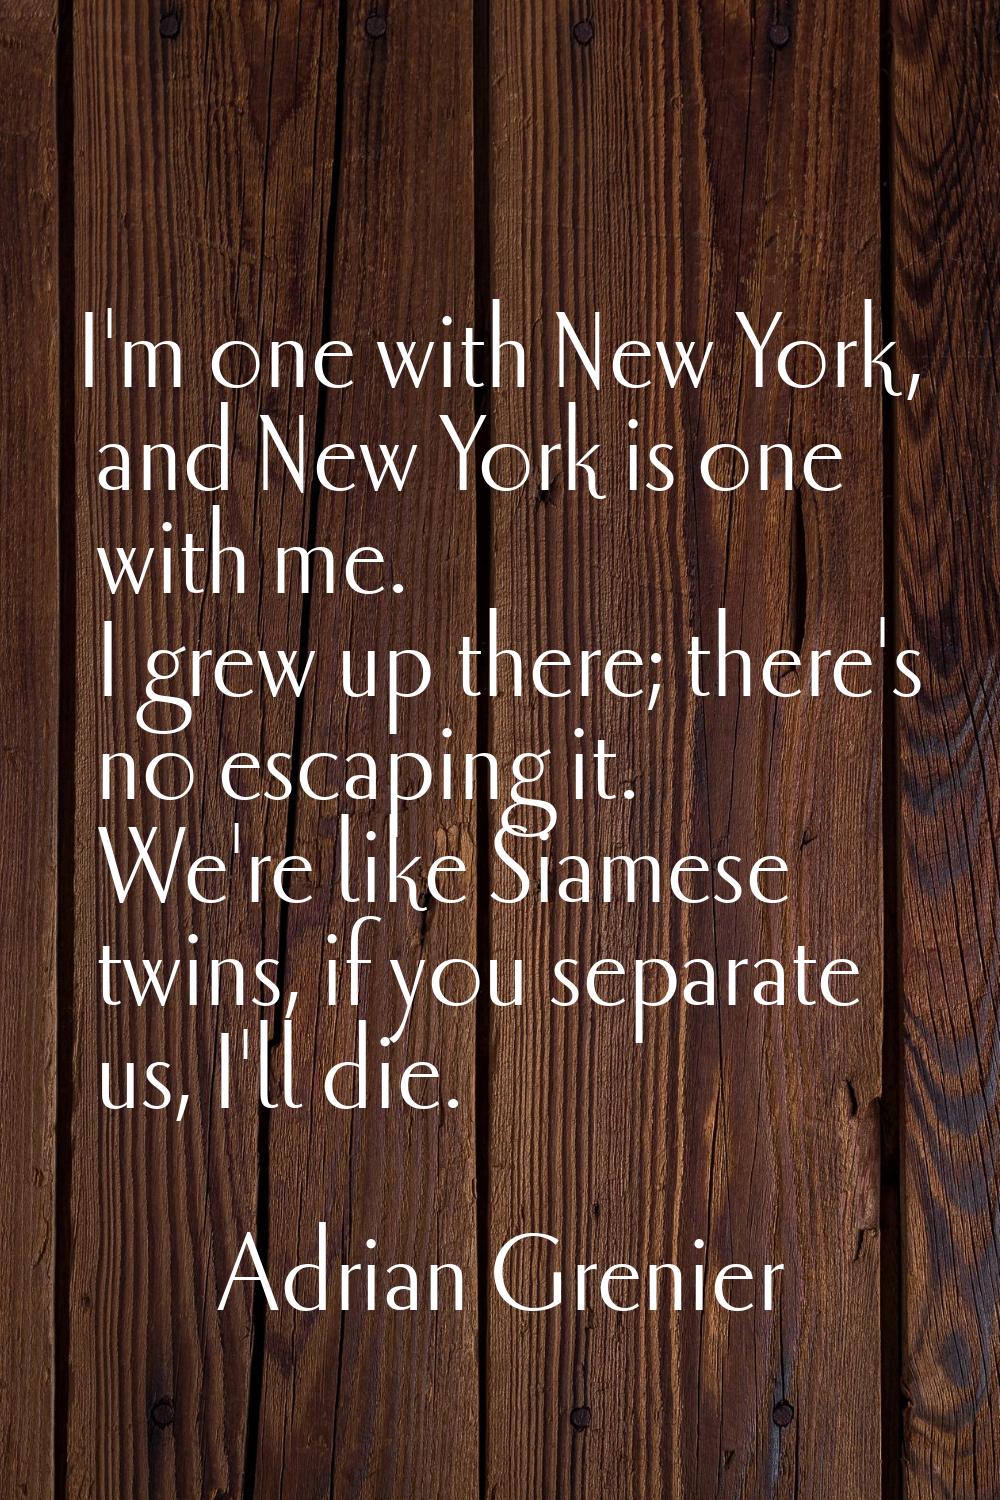 I'm one with New York, and New York is one with me. I grew up there; there's no escaping it. We're 